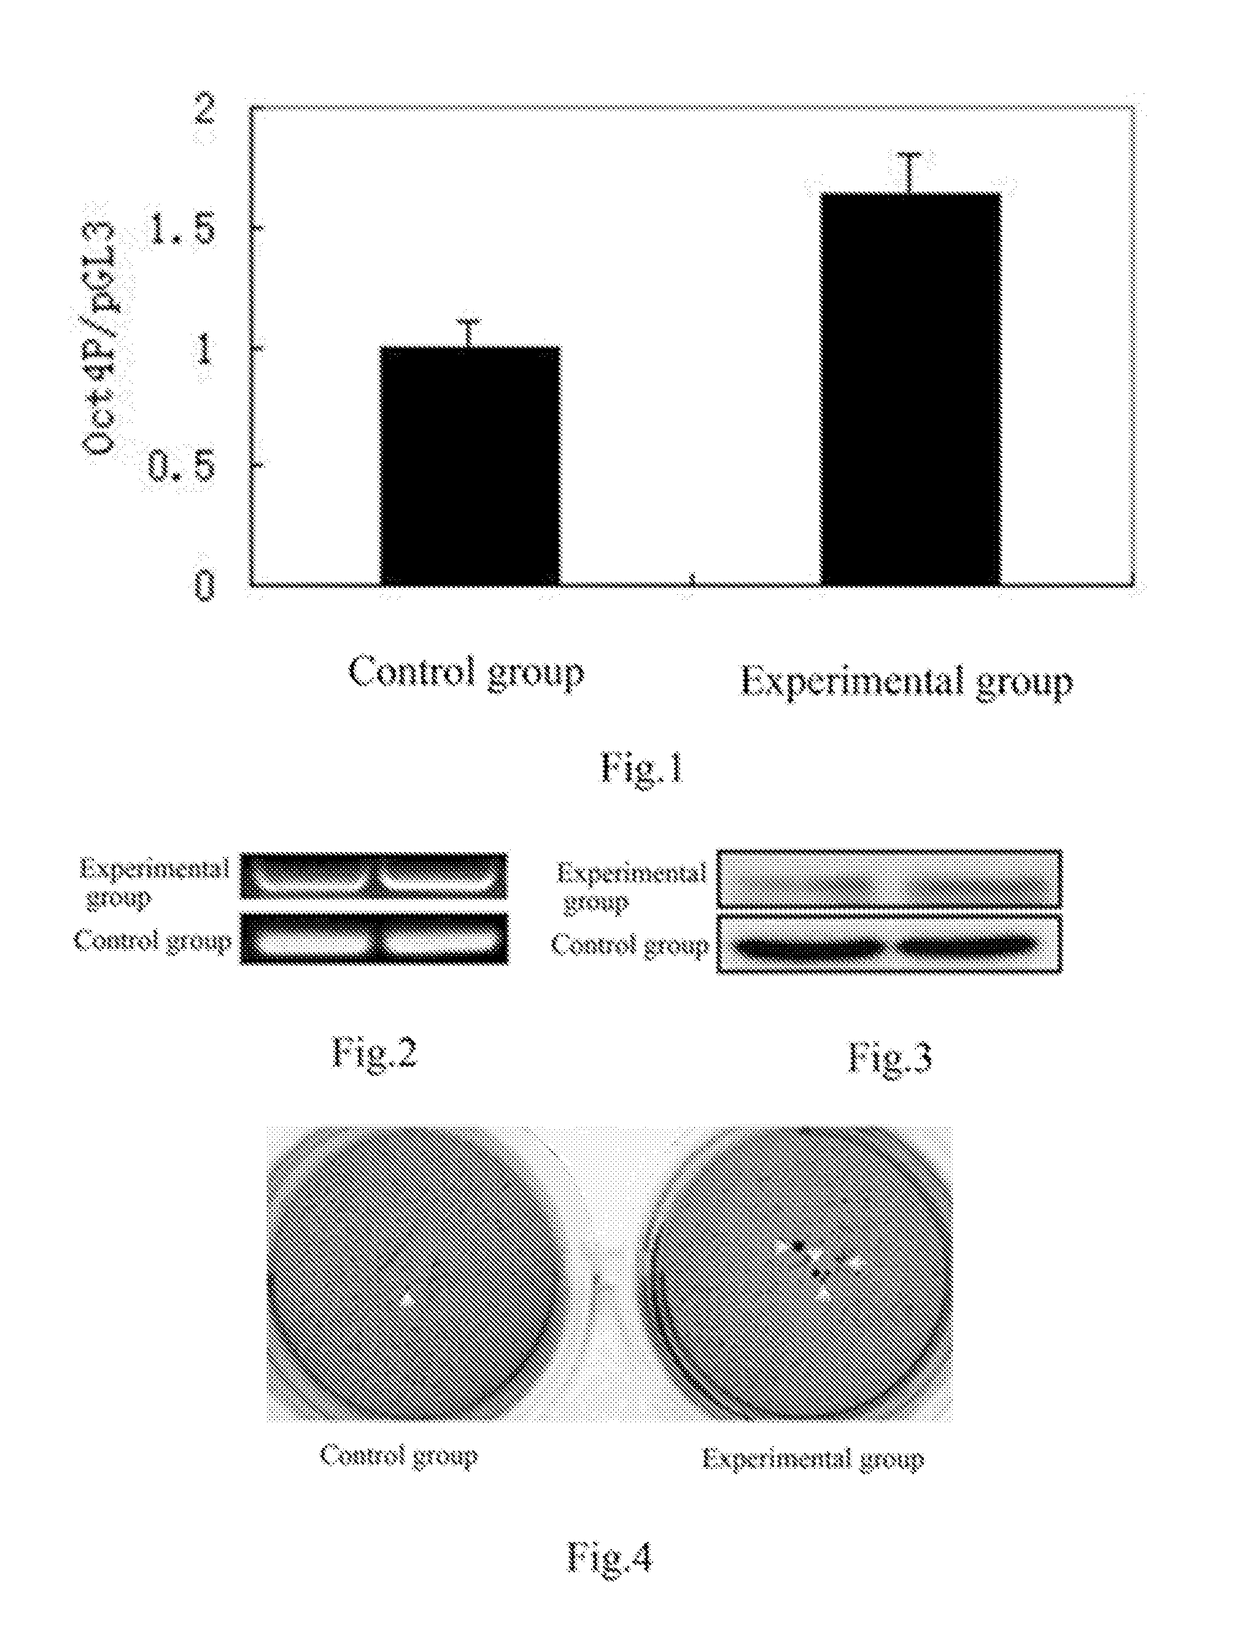 Application of ethyl p-methoxycinnamate and derivatives thereof in maintaining self-renewal and pluripotency of stem cells